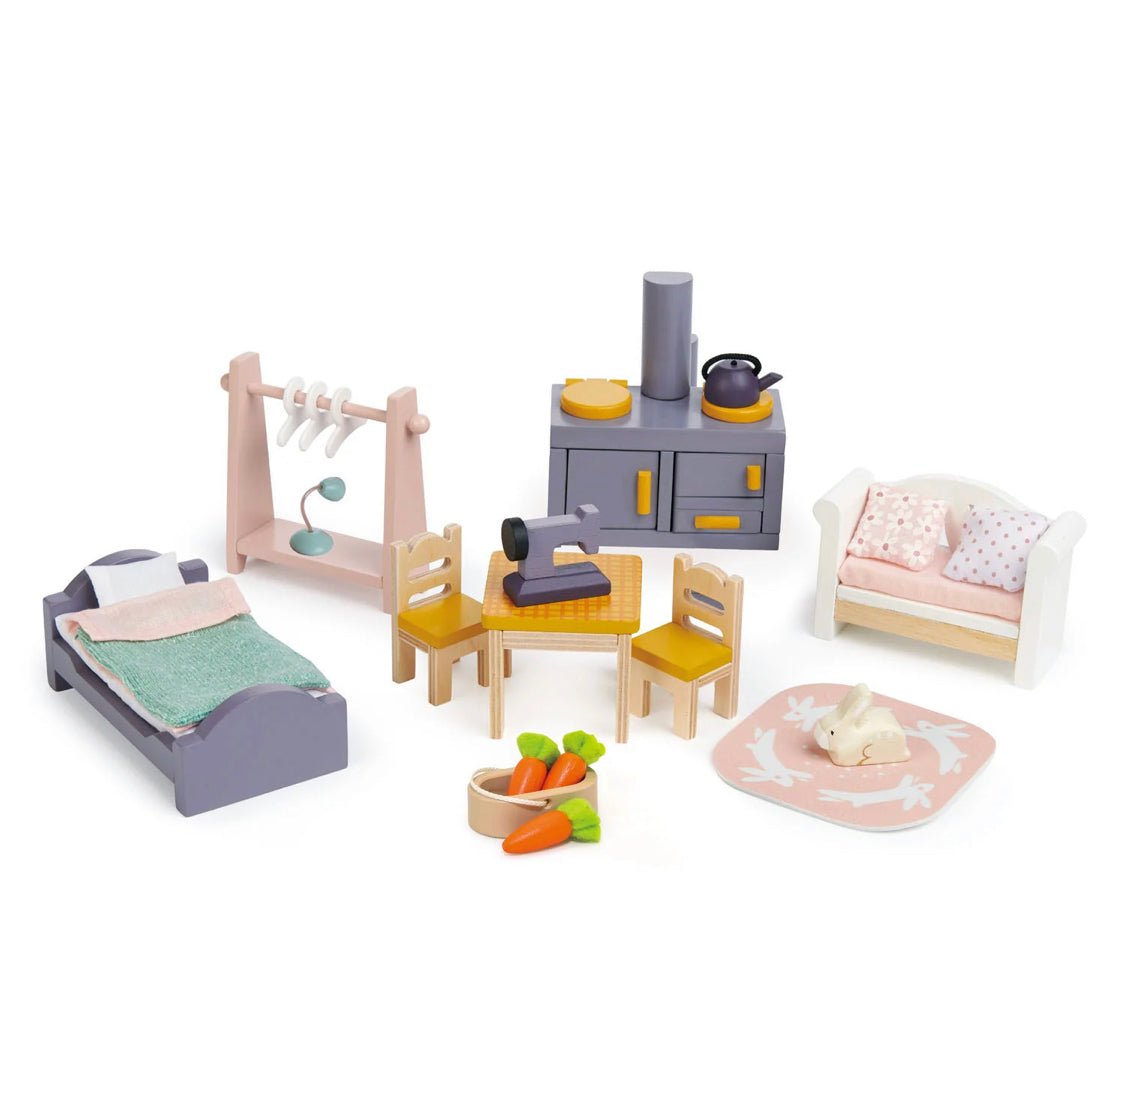 eco-friendly wooden dollhouse furniture